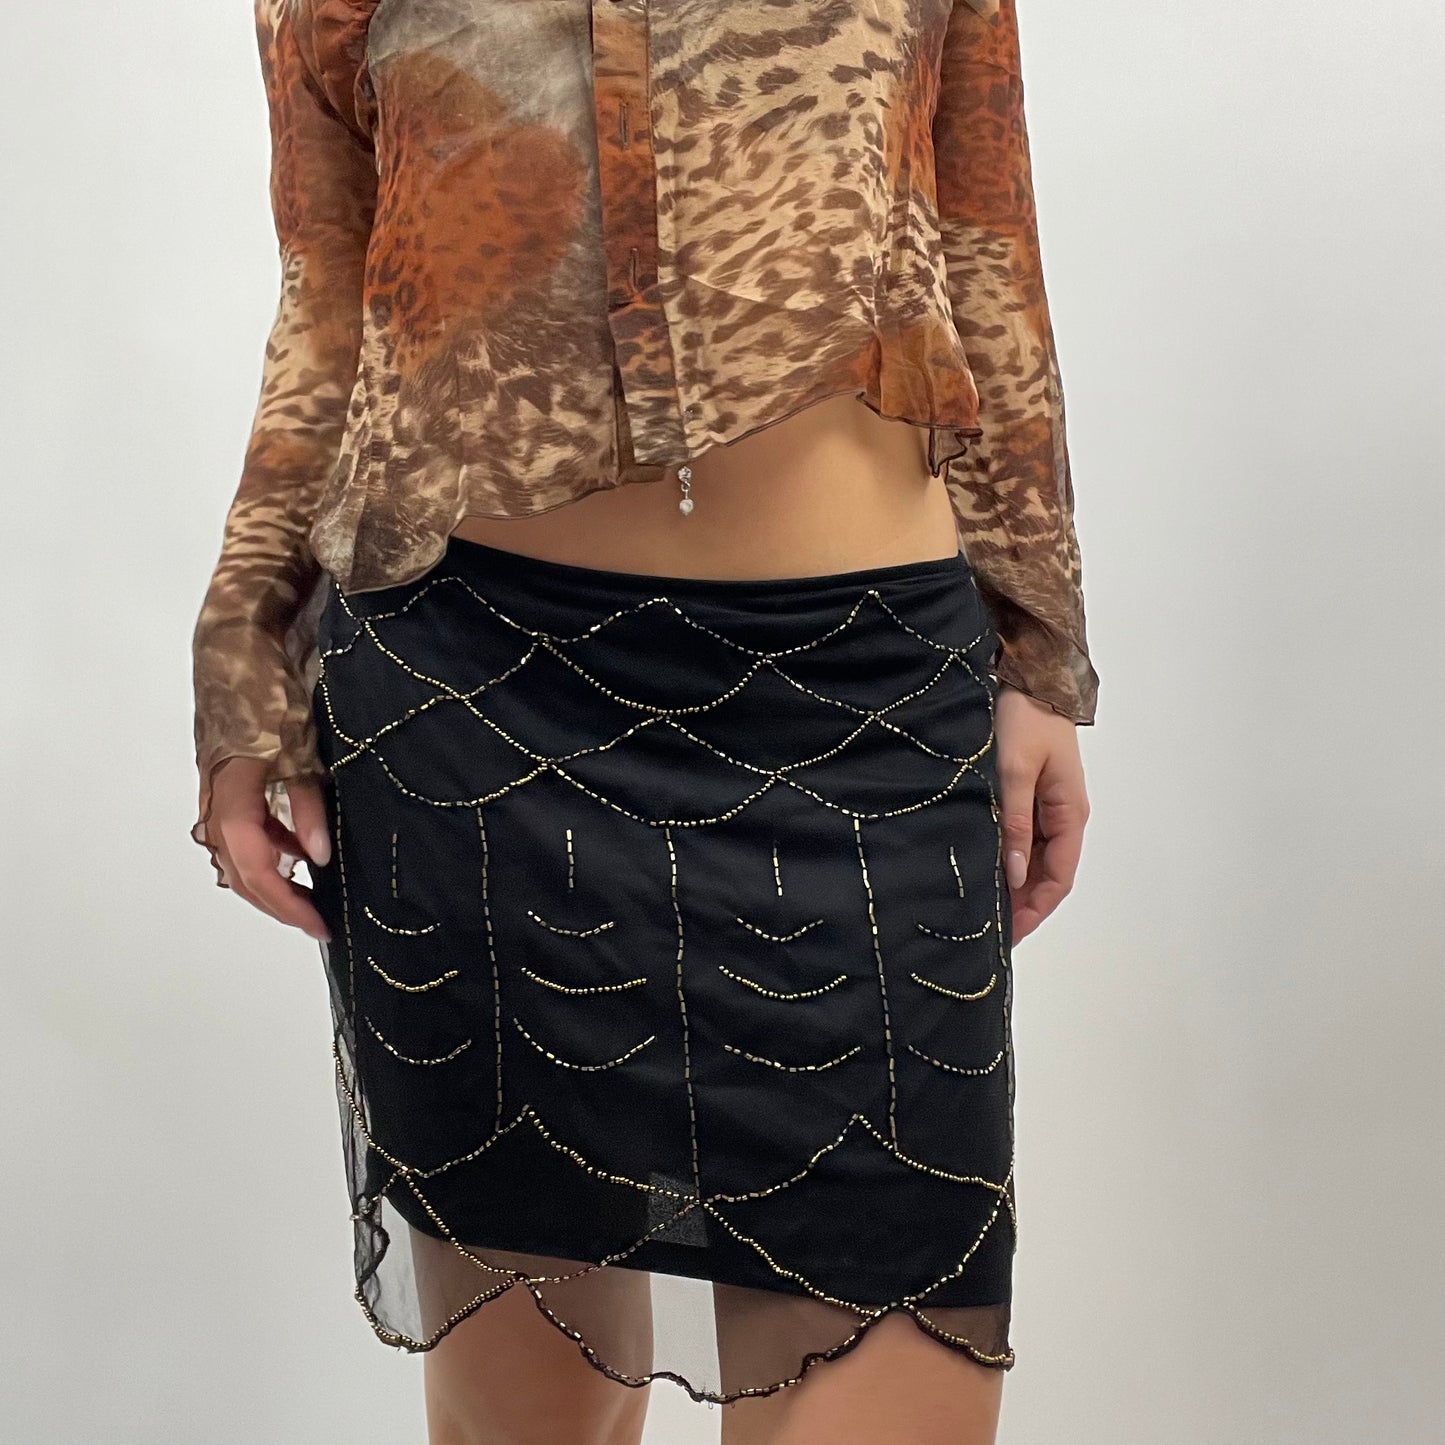 MOB WIFE DROP | small black mini skirt with gold beaded detail